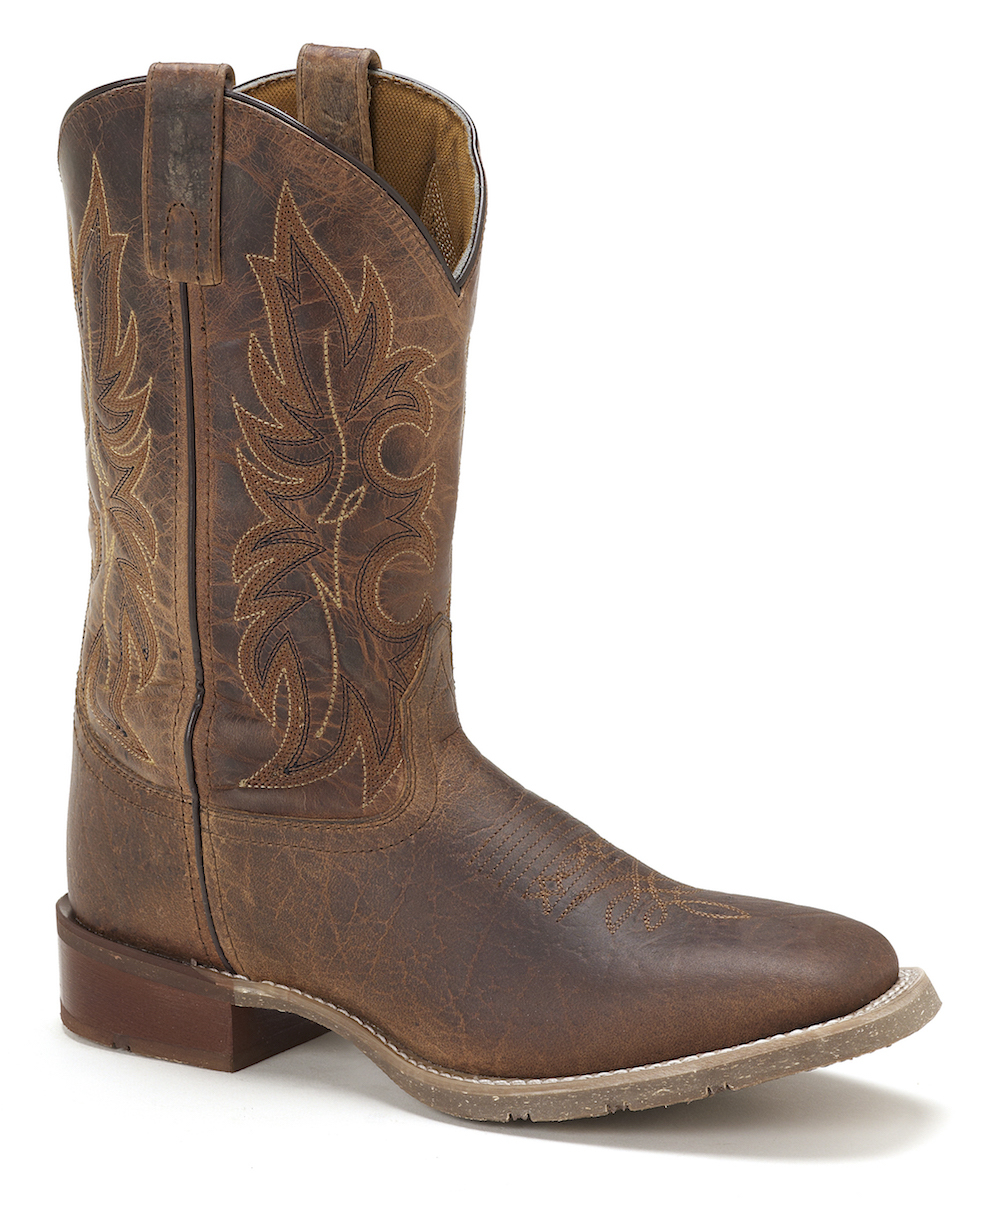 justin boots for men near me